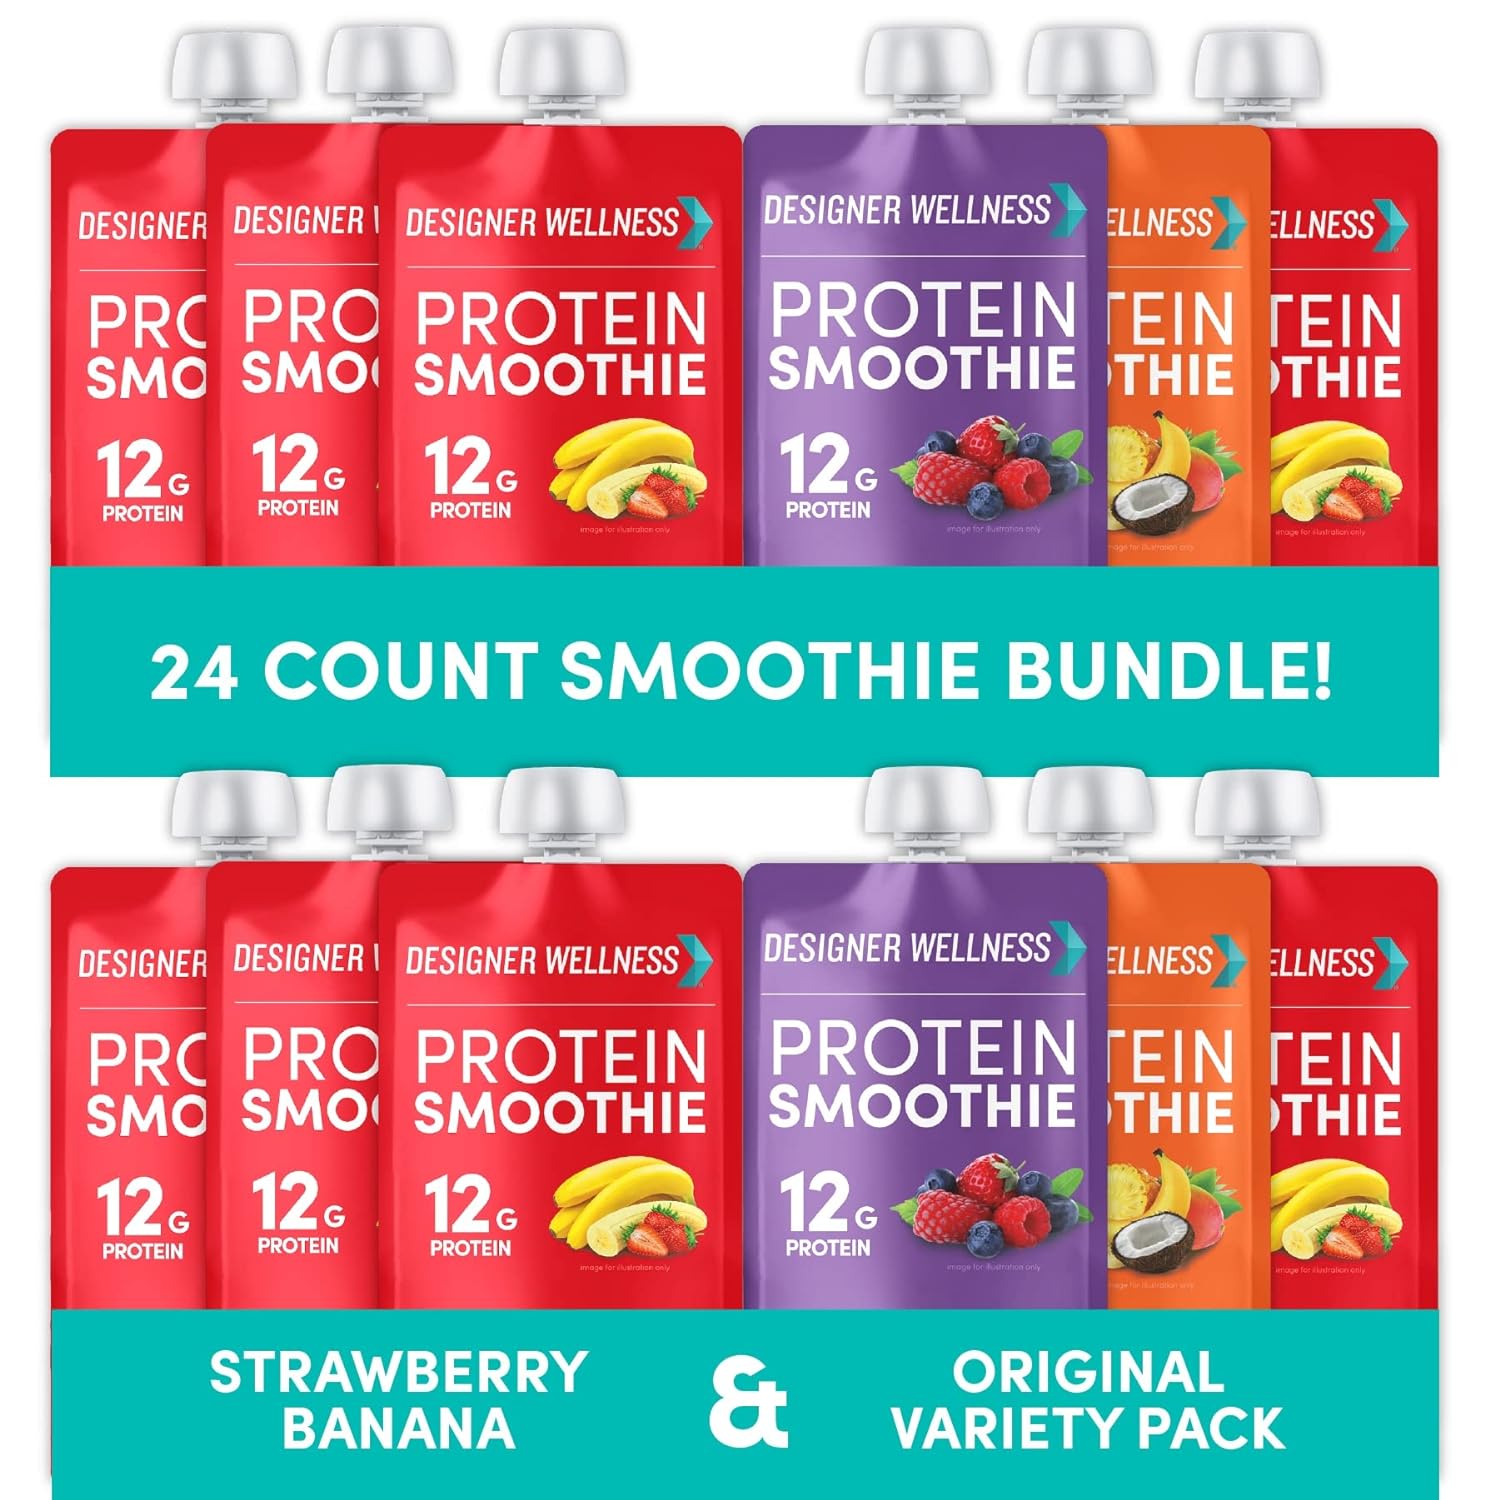 Designer Wellness Protein Smoothies Variety Pack and Strawberry Banana Bundle( 12 pack) each  12 g